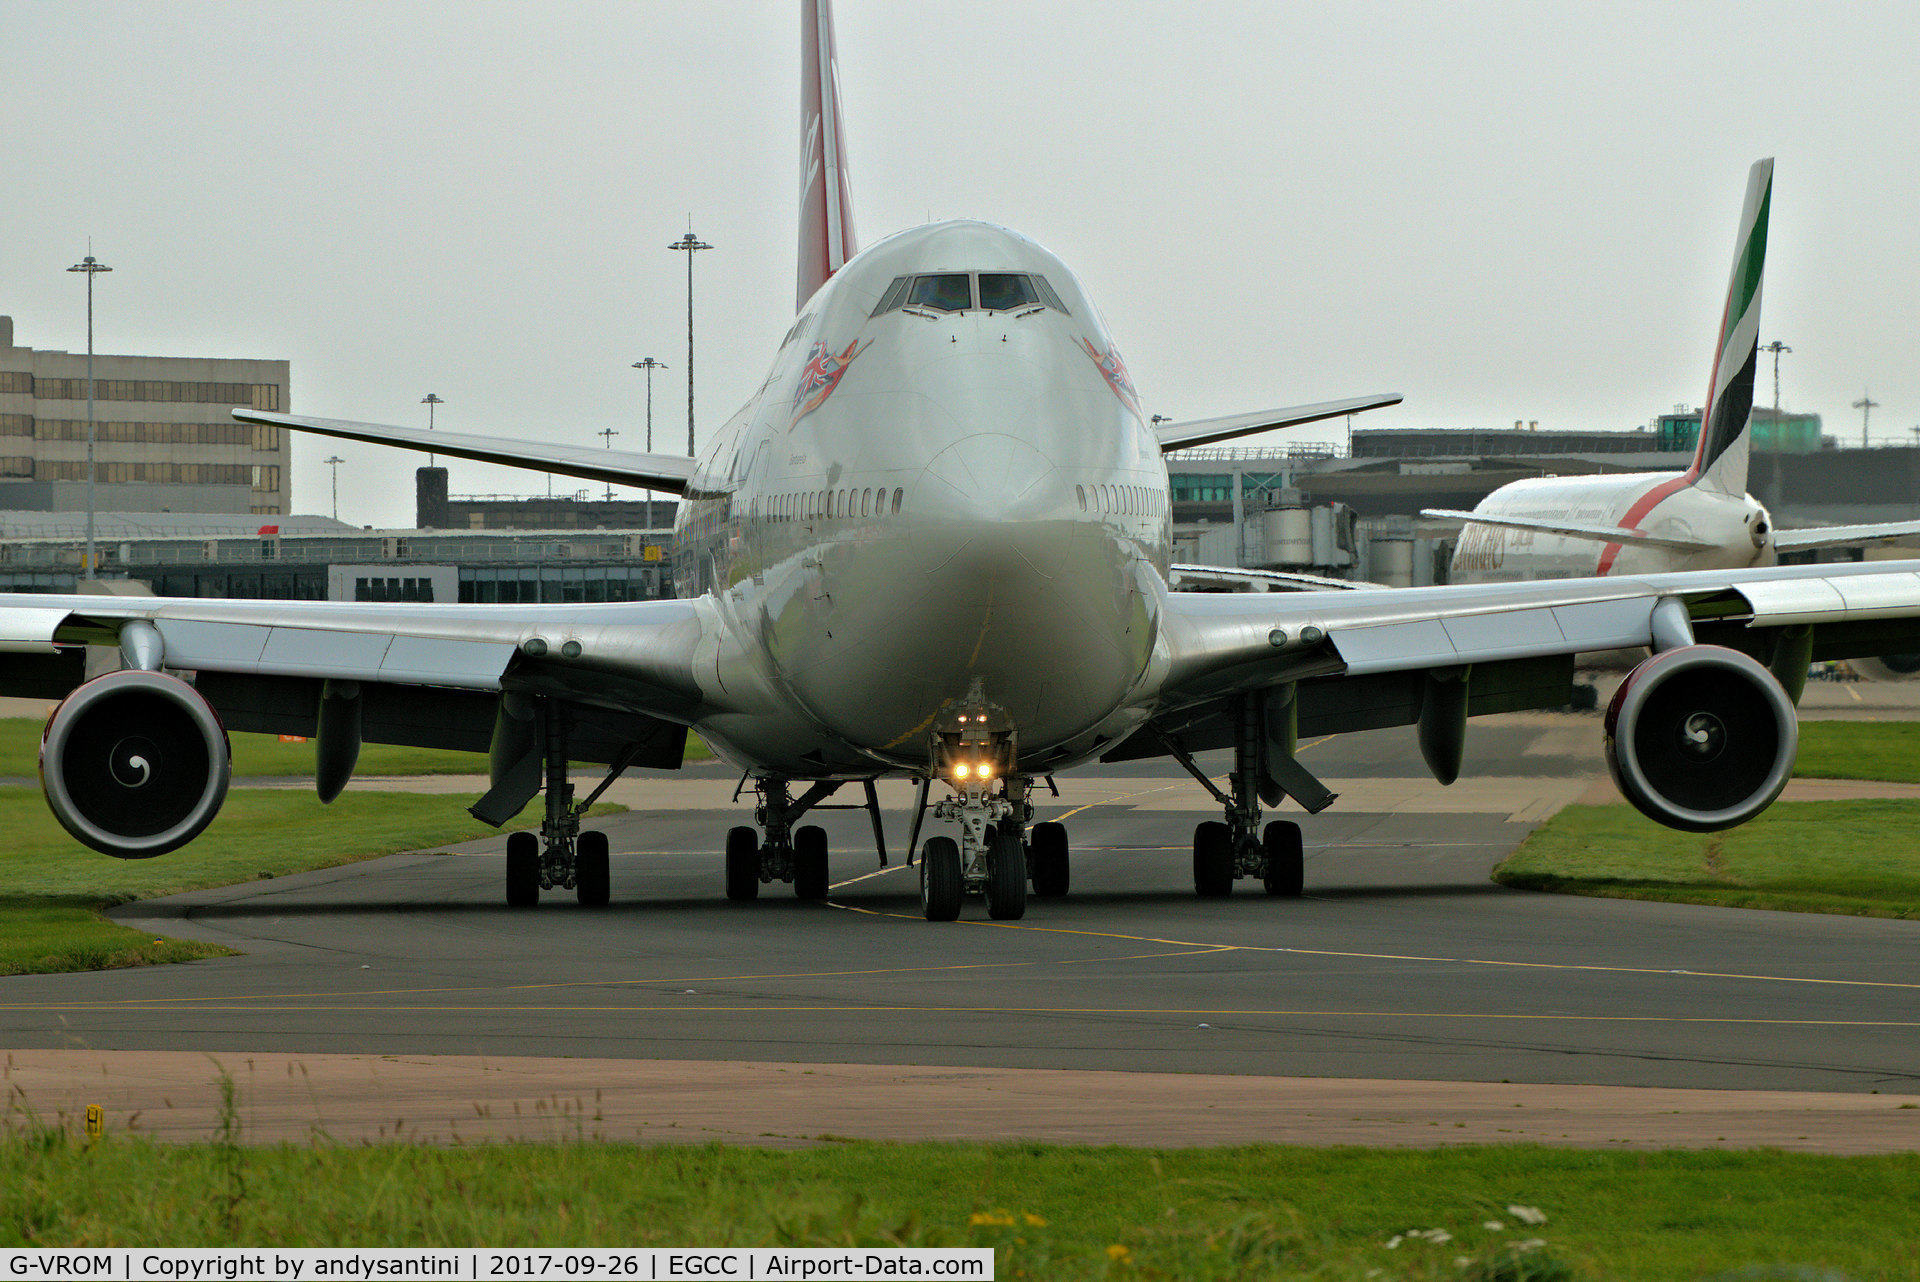 G-VROM, 2001 Boeing 747-443 C/N 32339, taxing out for take off